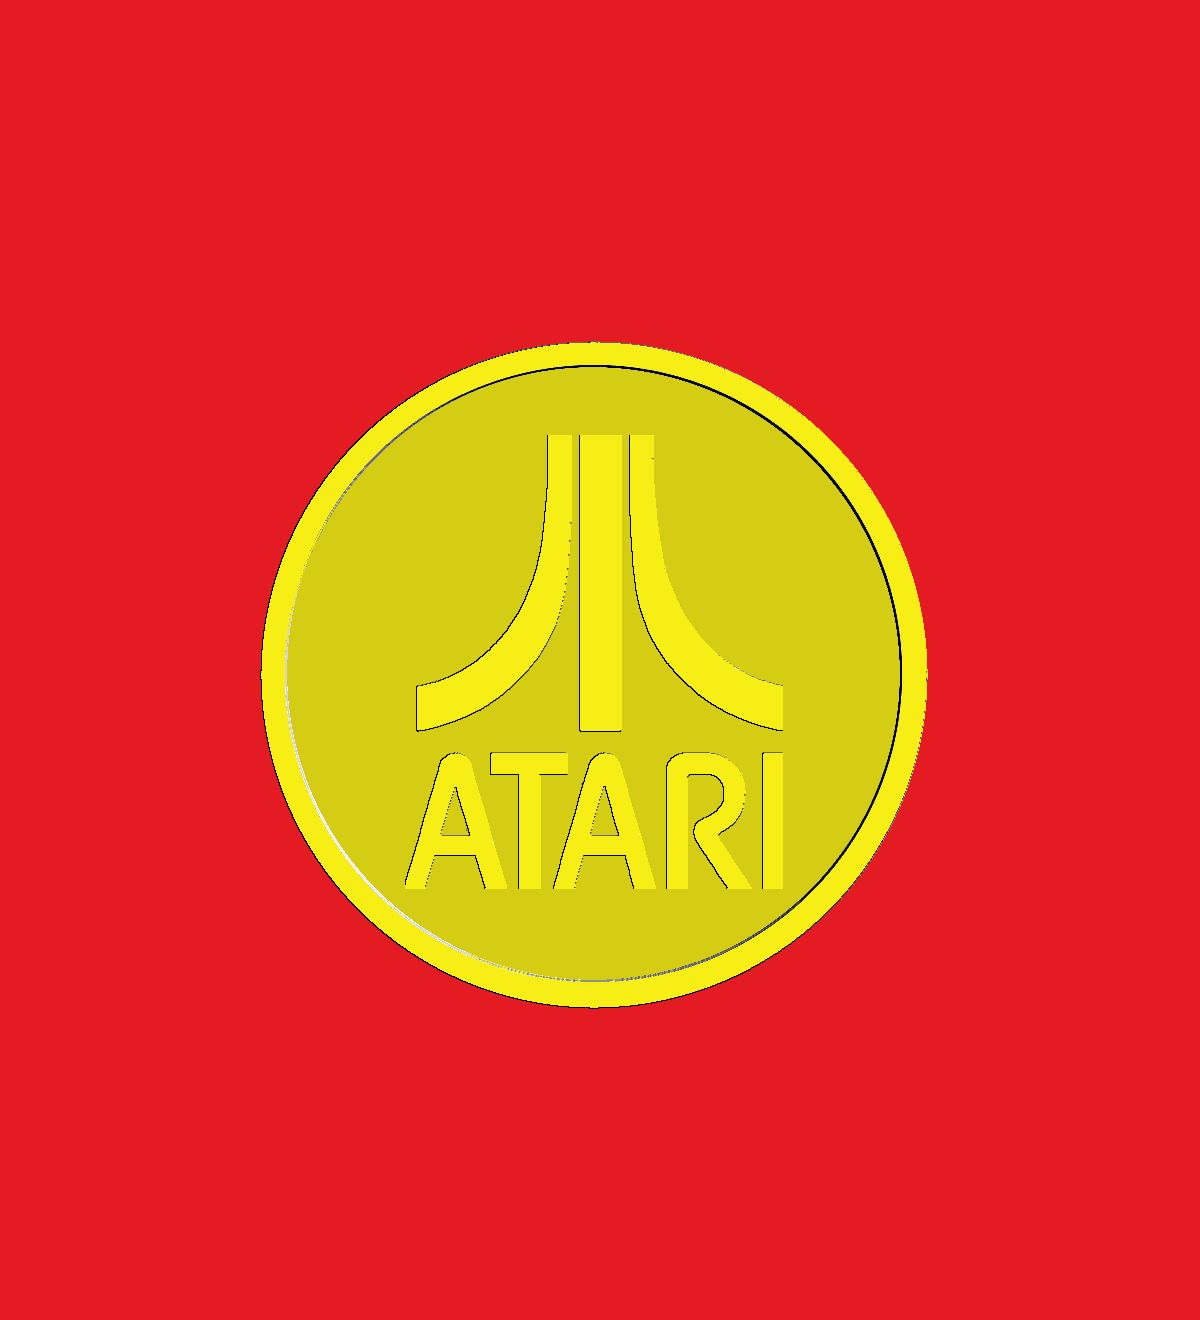 Atari is Making Their Own Cryptocurrencies